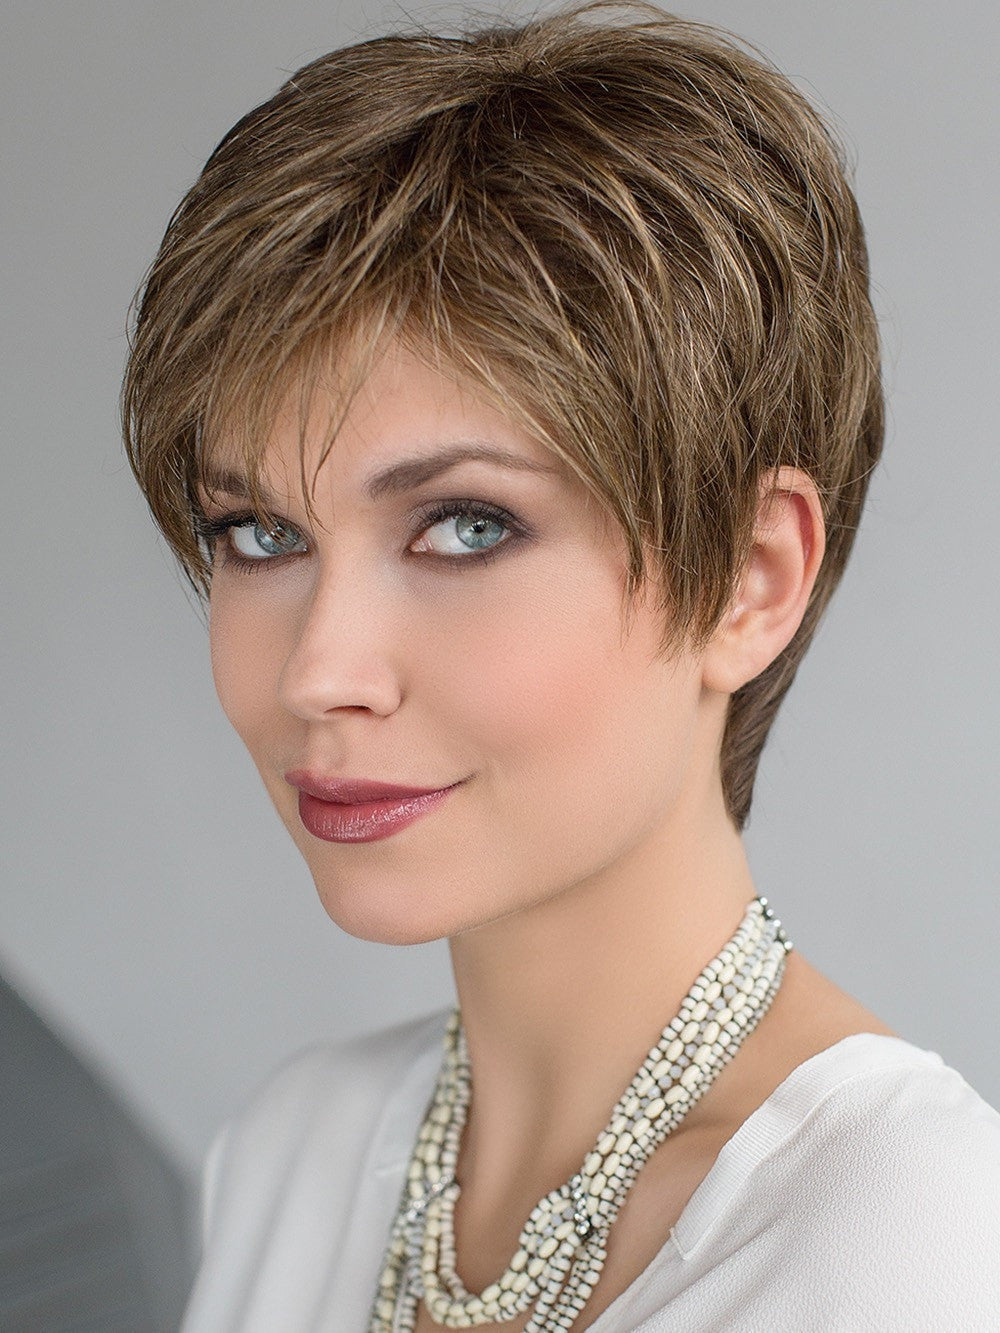 SELECT Wig by Ellen Wille in MOCCA MIX | Medium Brown, Light Brown, and Light Auburn blend PPC MAIN IMAGE